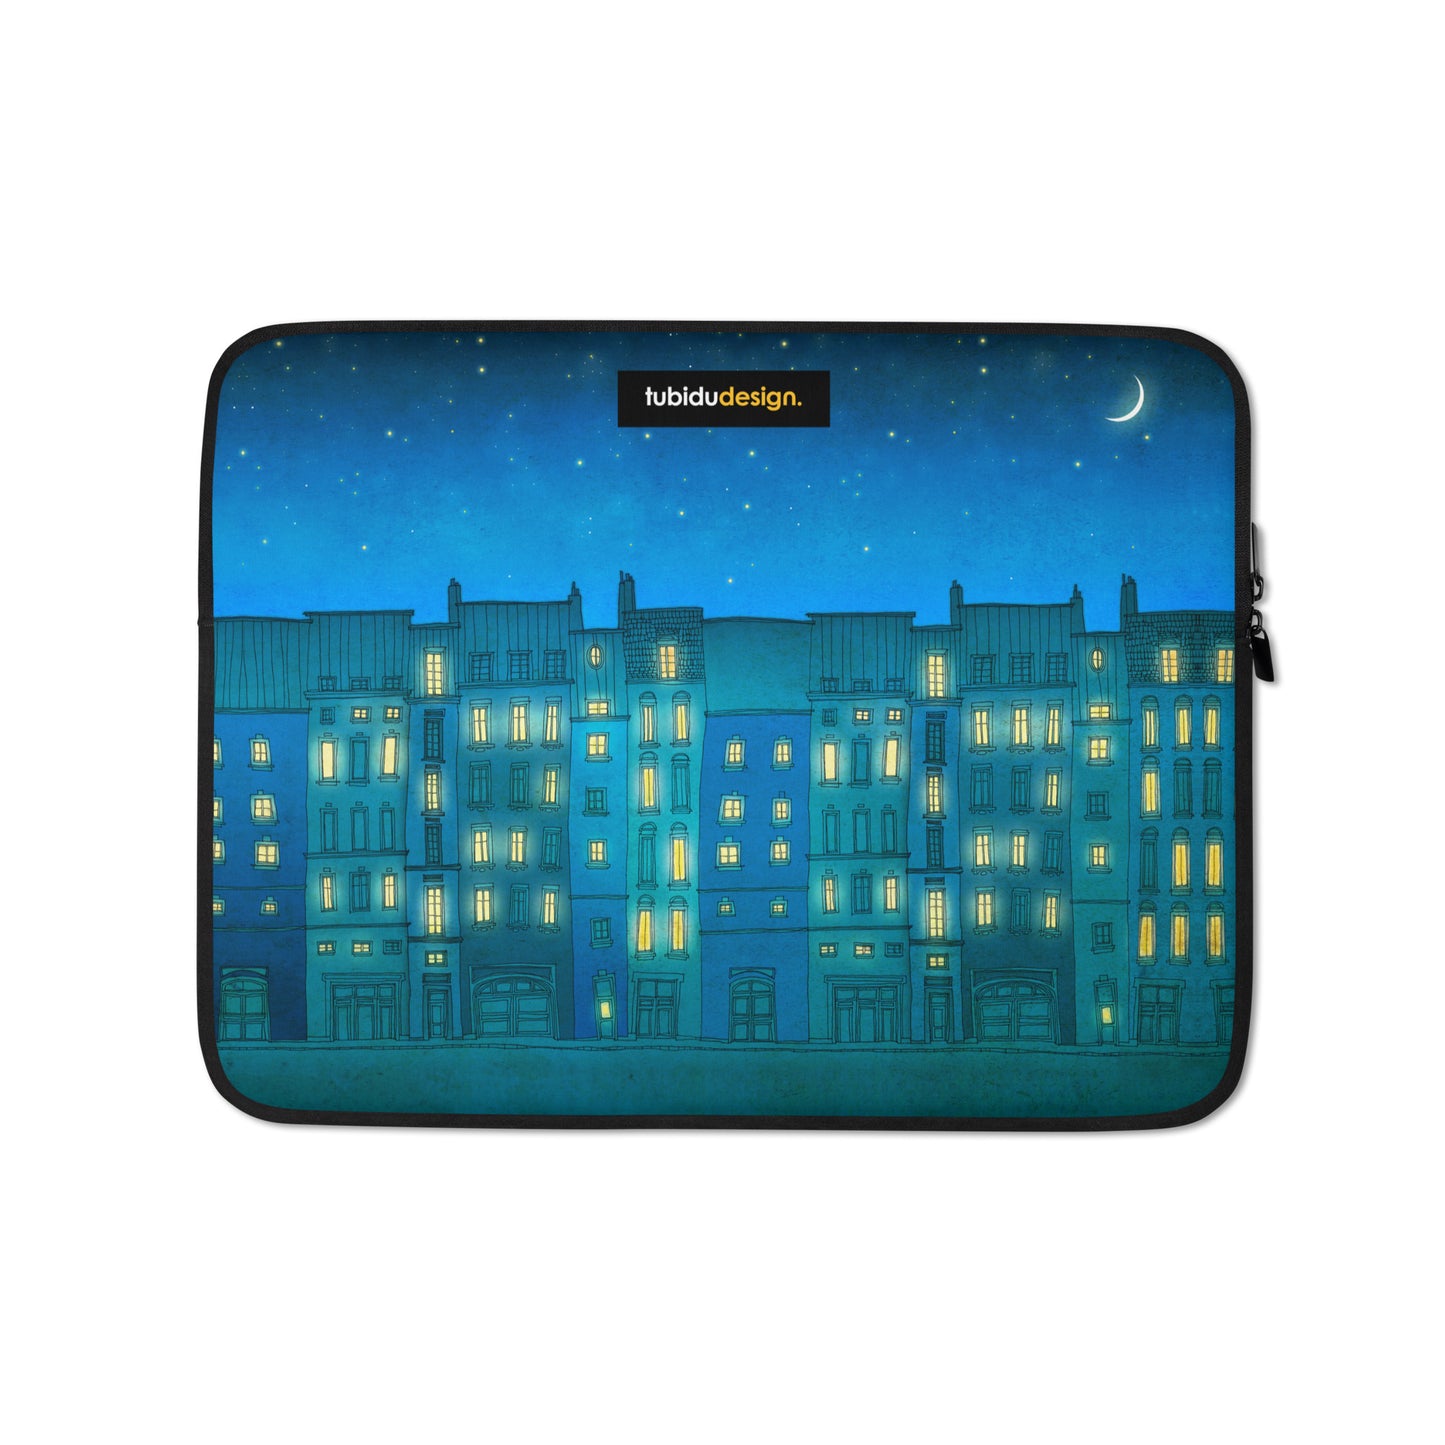 You are not alone - Illustrated Laptop Sleeve